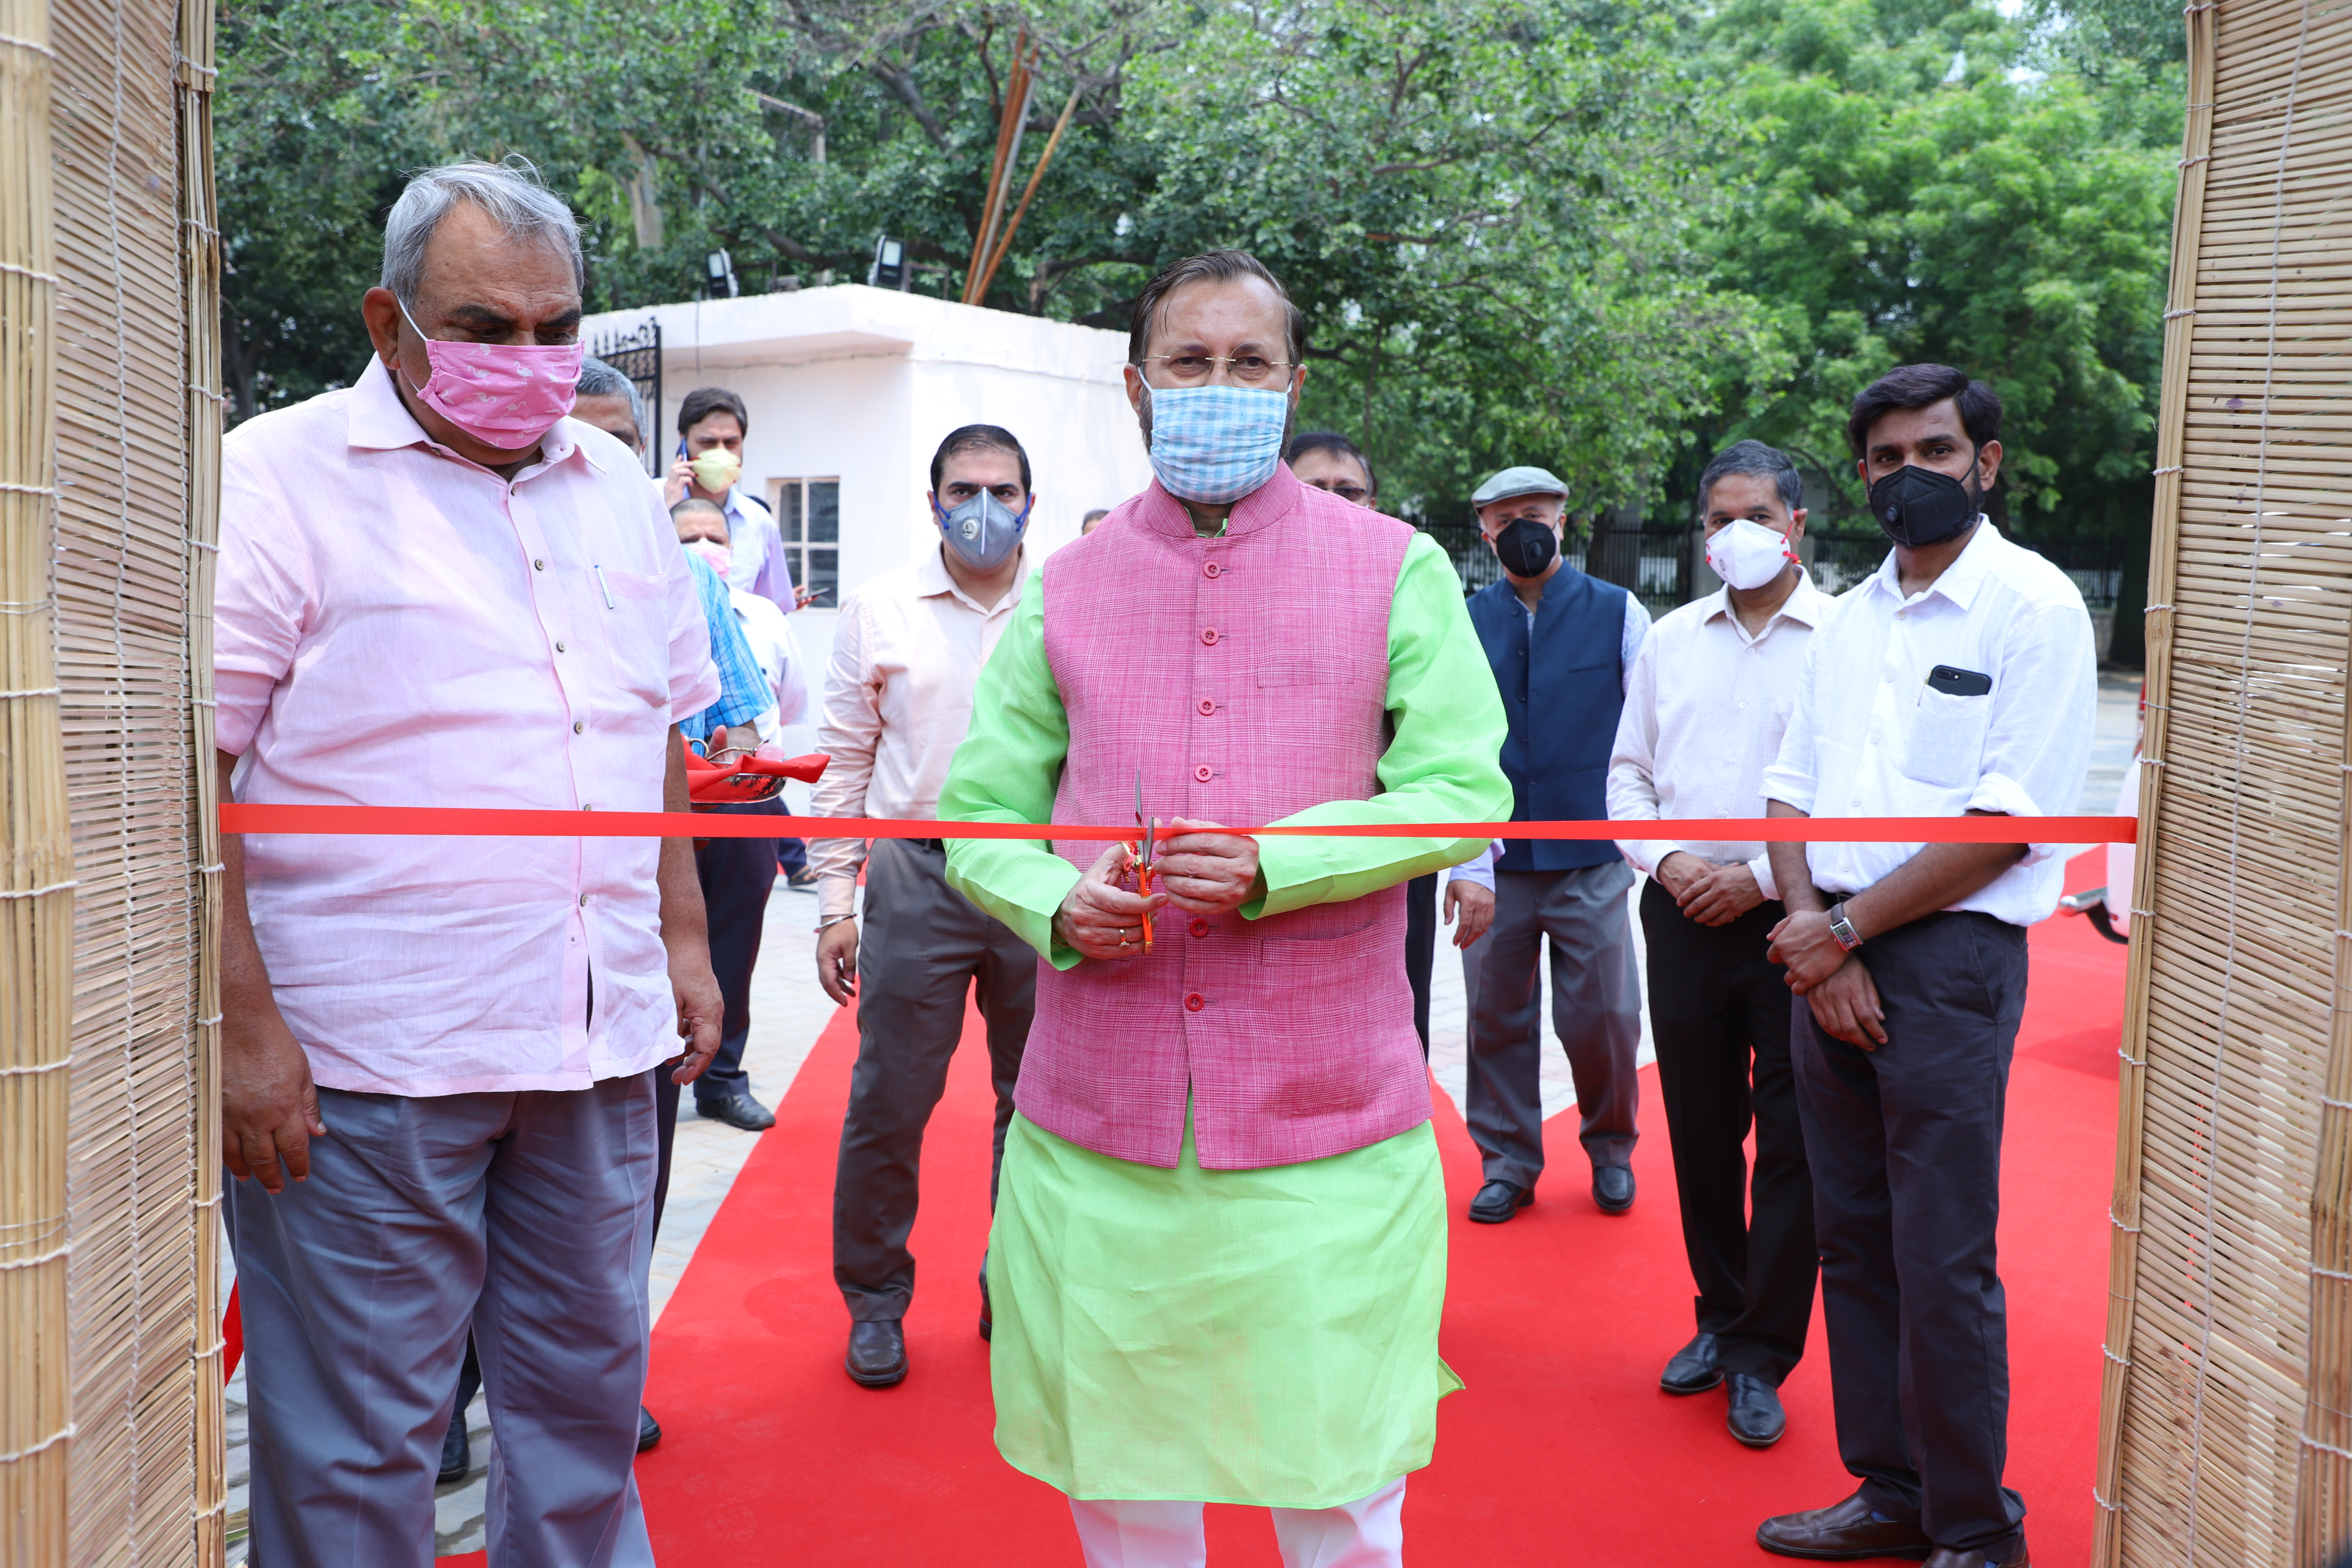 Urban forest - Inaugurated by Shri Prakash Javadekar, Minster of Environment and climate change in the presence of Shri Rajiv Mehrishi CAG of India on 2nd July 2020